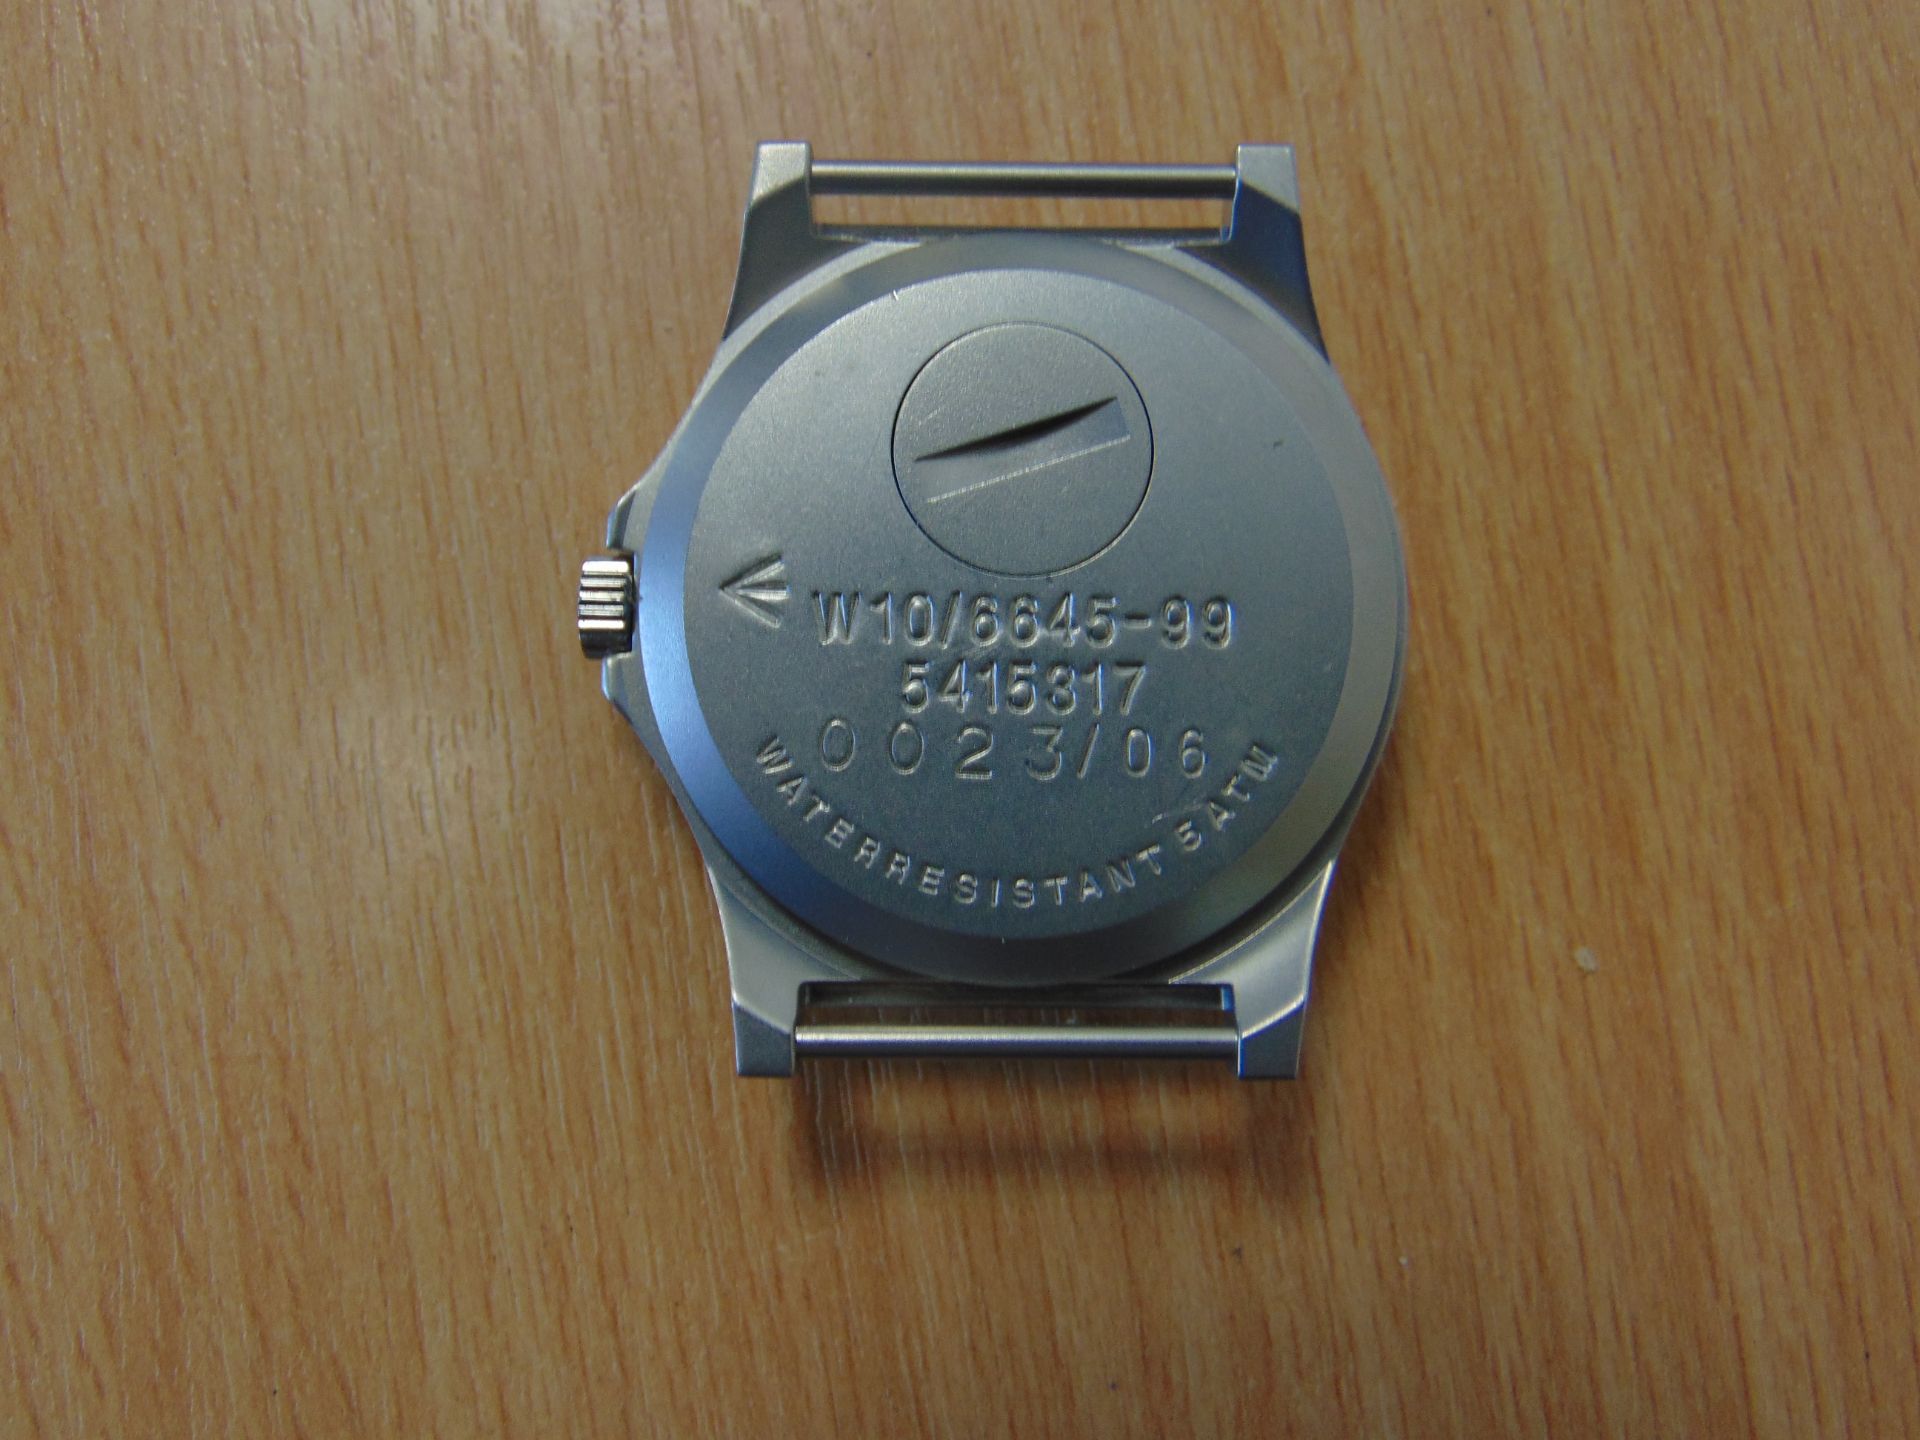 UNISSUED CWC W10 SERVICE WATCH -WATER RESISTENT TO 5ATM NATO MARKED DATED 2006 - Image 7 of 10